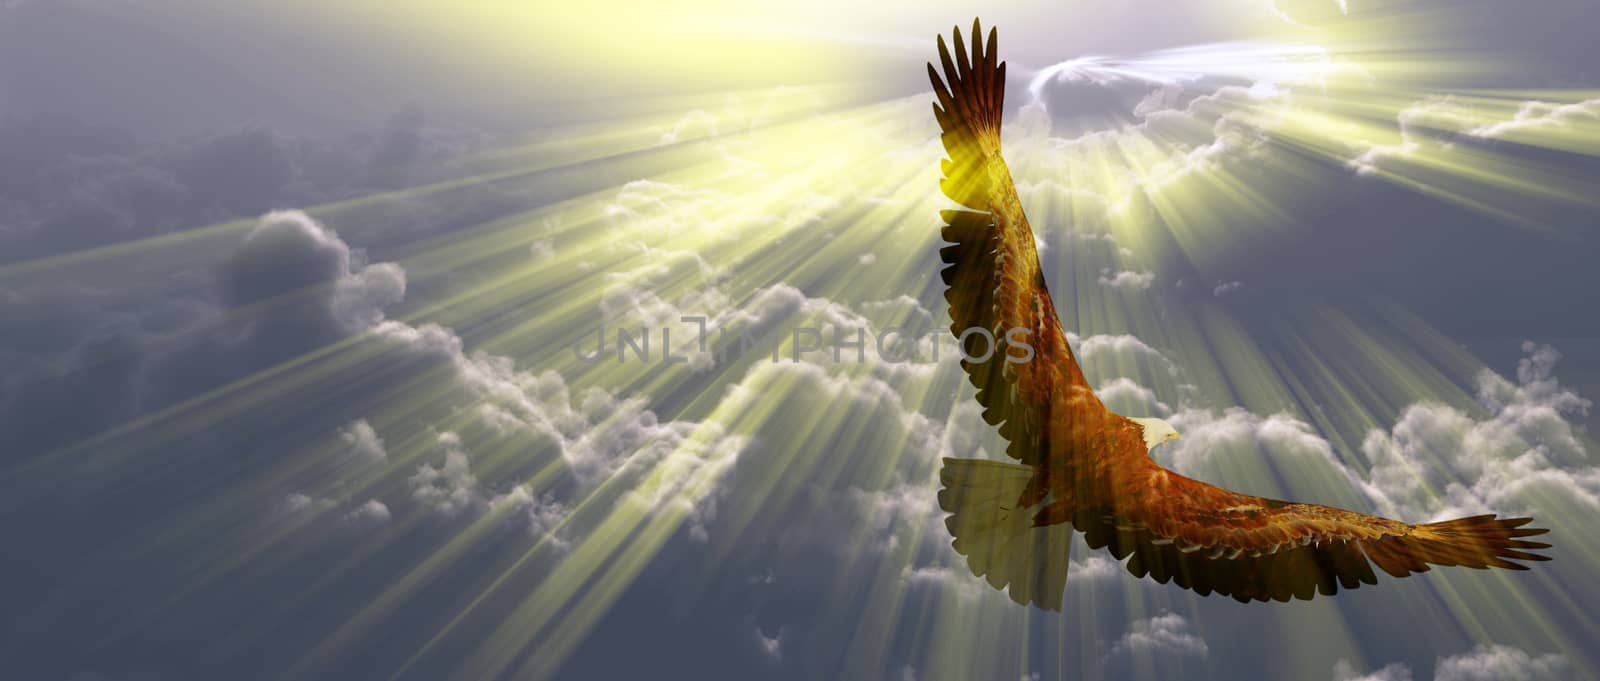 Eagle in flight above the clouds. Sunset or sunrise